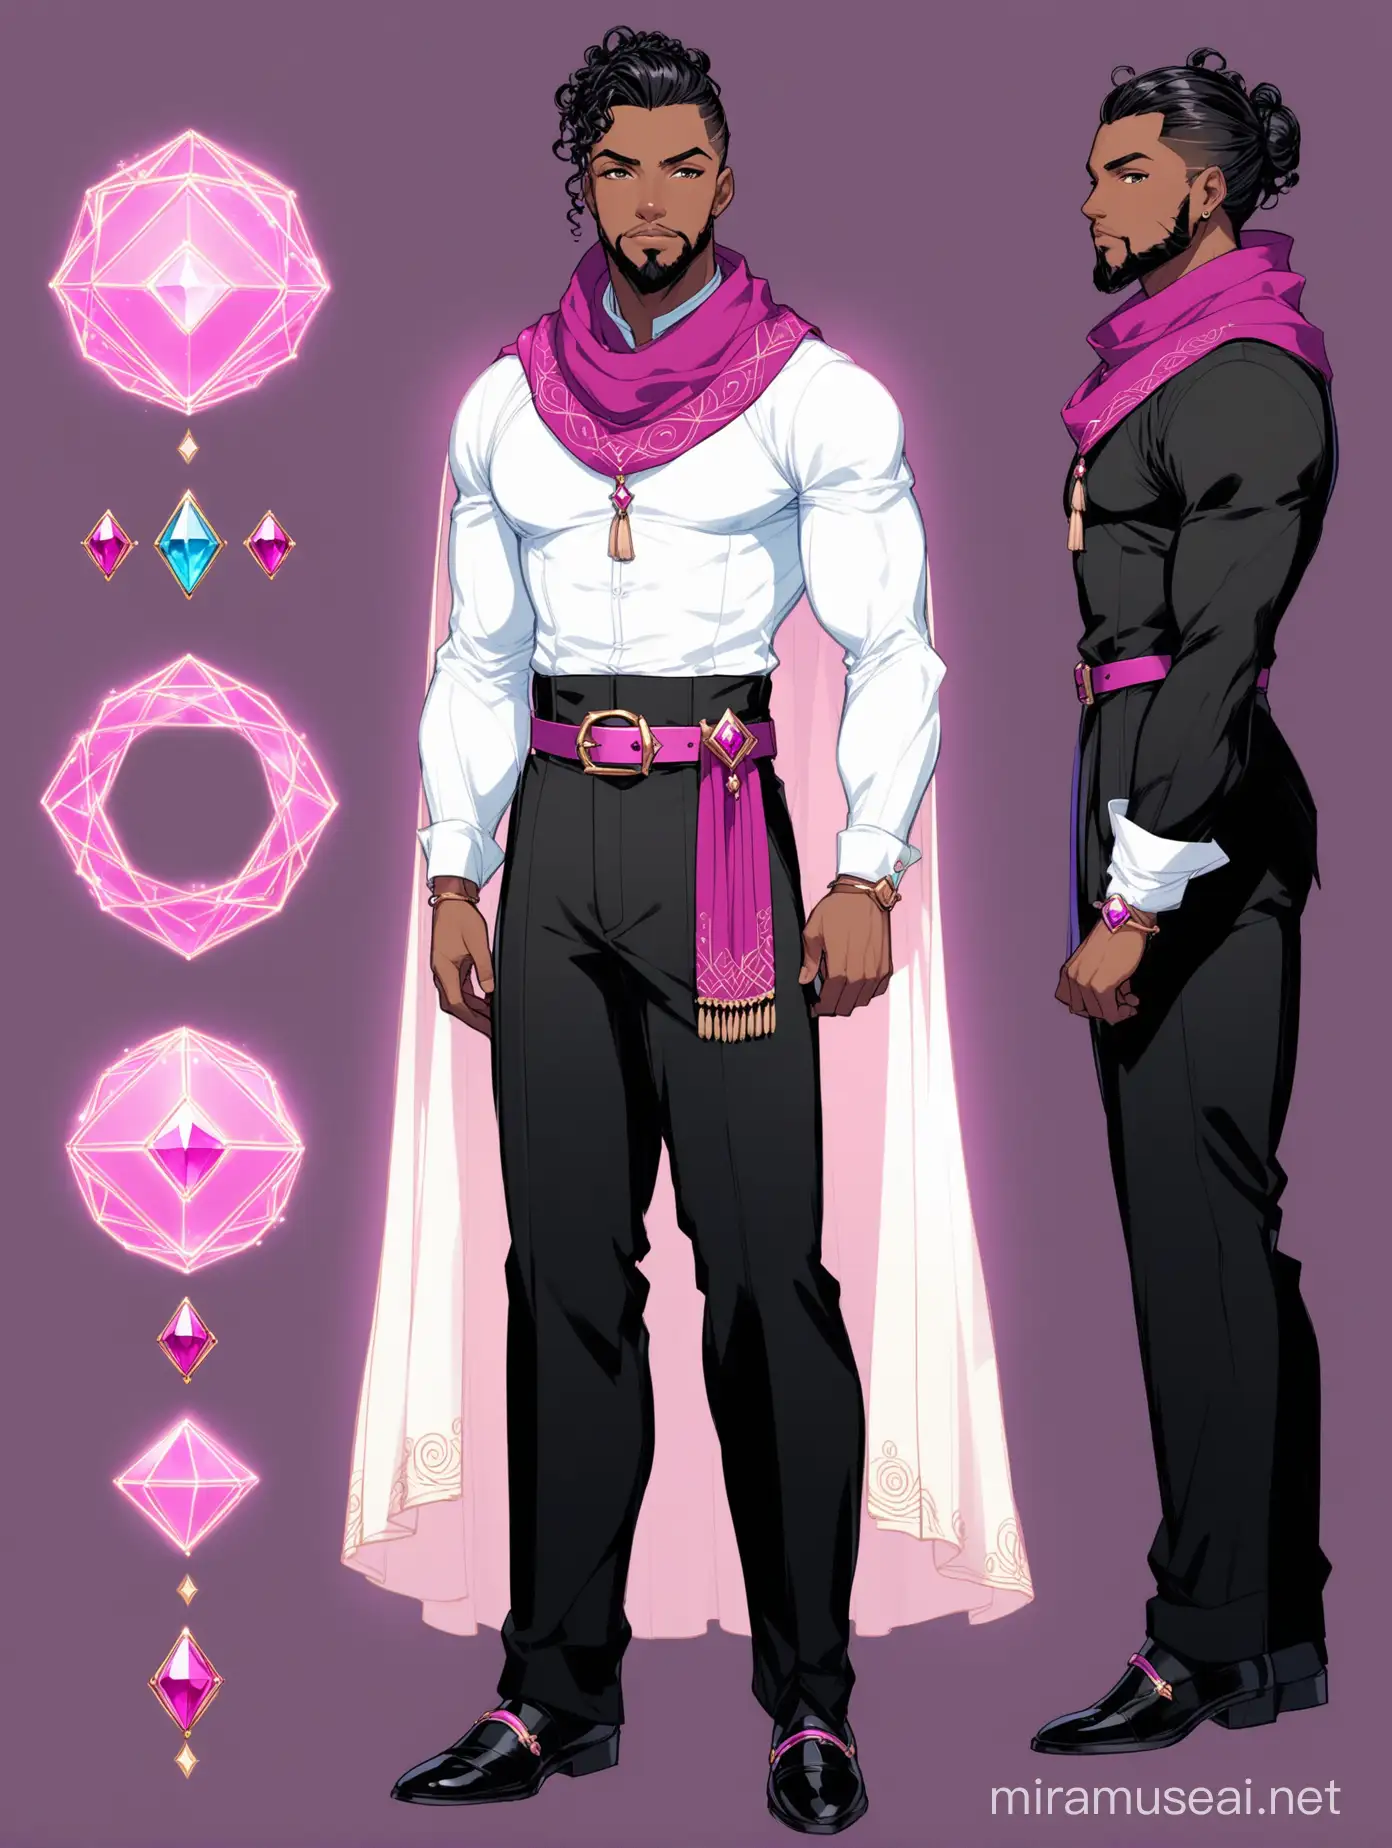 dapper 30s wideset muscular black male, charismatic dnd fantasy mage spellcaster, curly black topknot bun with undercut, well-groomed facial hair, black embroidered shirt, cyan fuchsia rolled-up sleeves, black dress pants, simple black dress shoes, pastel-colored scarf, white periwinkle semi-sheer cape, blue diamond in forehead, numerous skyblue fuchsia belt tassels, rosegold jewelry, soft lighting, animation character reference sheet